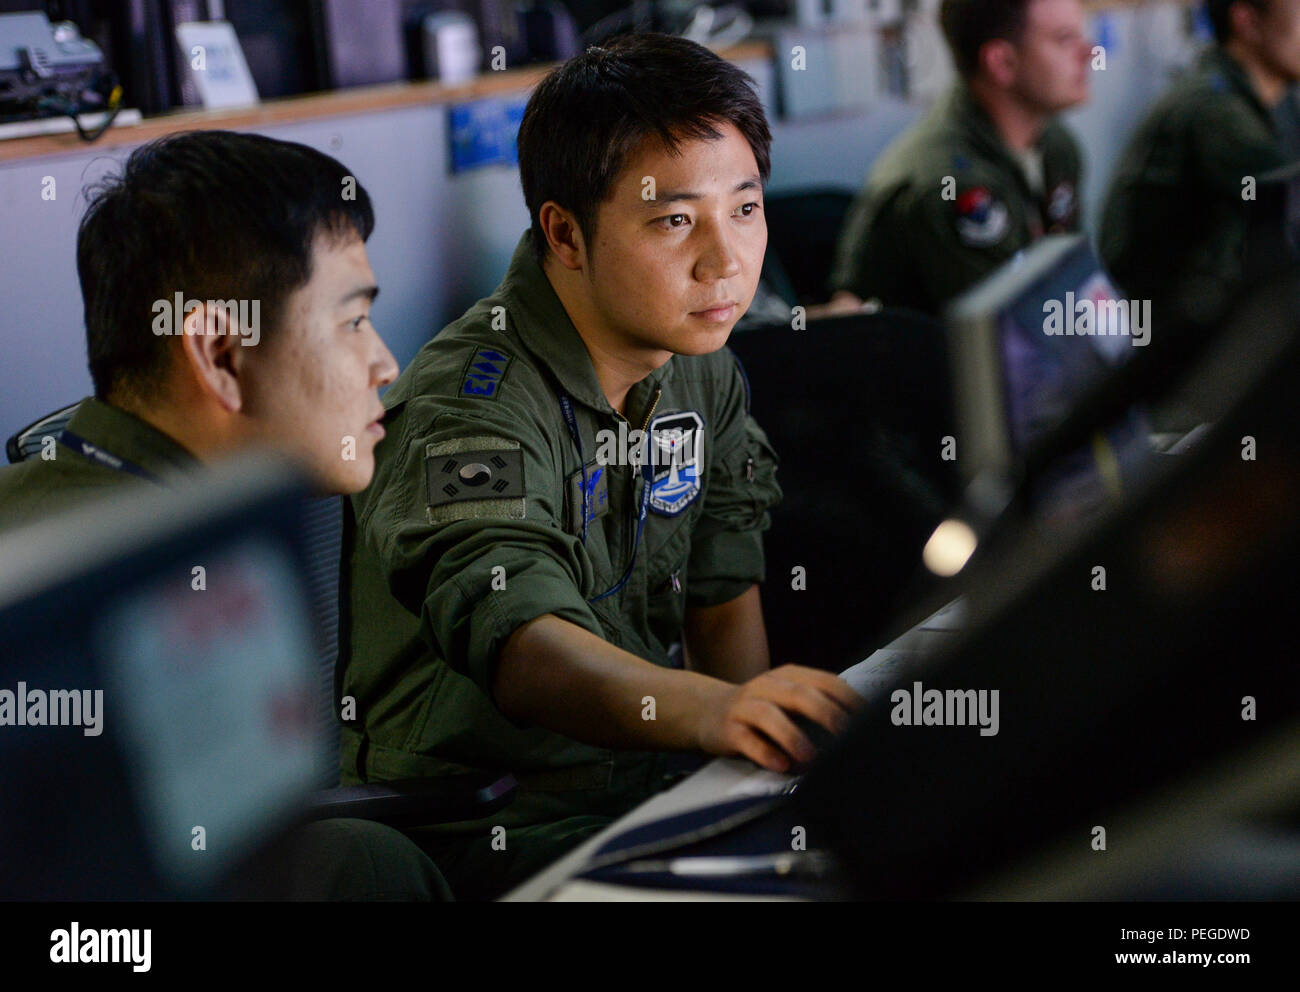 Republic of Korea Air Force Capt. Won Jung Seung, 6th Rescue Group pilot, monitors ROK air space at the Hardened Theater Air Control Center, Osan Air Base, ROK, during the first day of Ulchi Freedom Guardian, Aug. 17, 2015. Part of Won’s responsibility is to receive and relay vital information to commanders in order to support air rescue operations. UFG is an annual exercise that brings together U.S., ROK and other allied forces in an effort to ensure readiness to defend the ROK and help maintain stability on the Korean Peninsula. (U.S. Air Force photo/Airman 1st Class John Linzmeier) Stock Photo